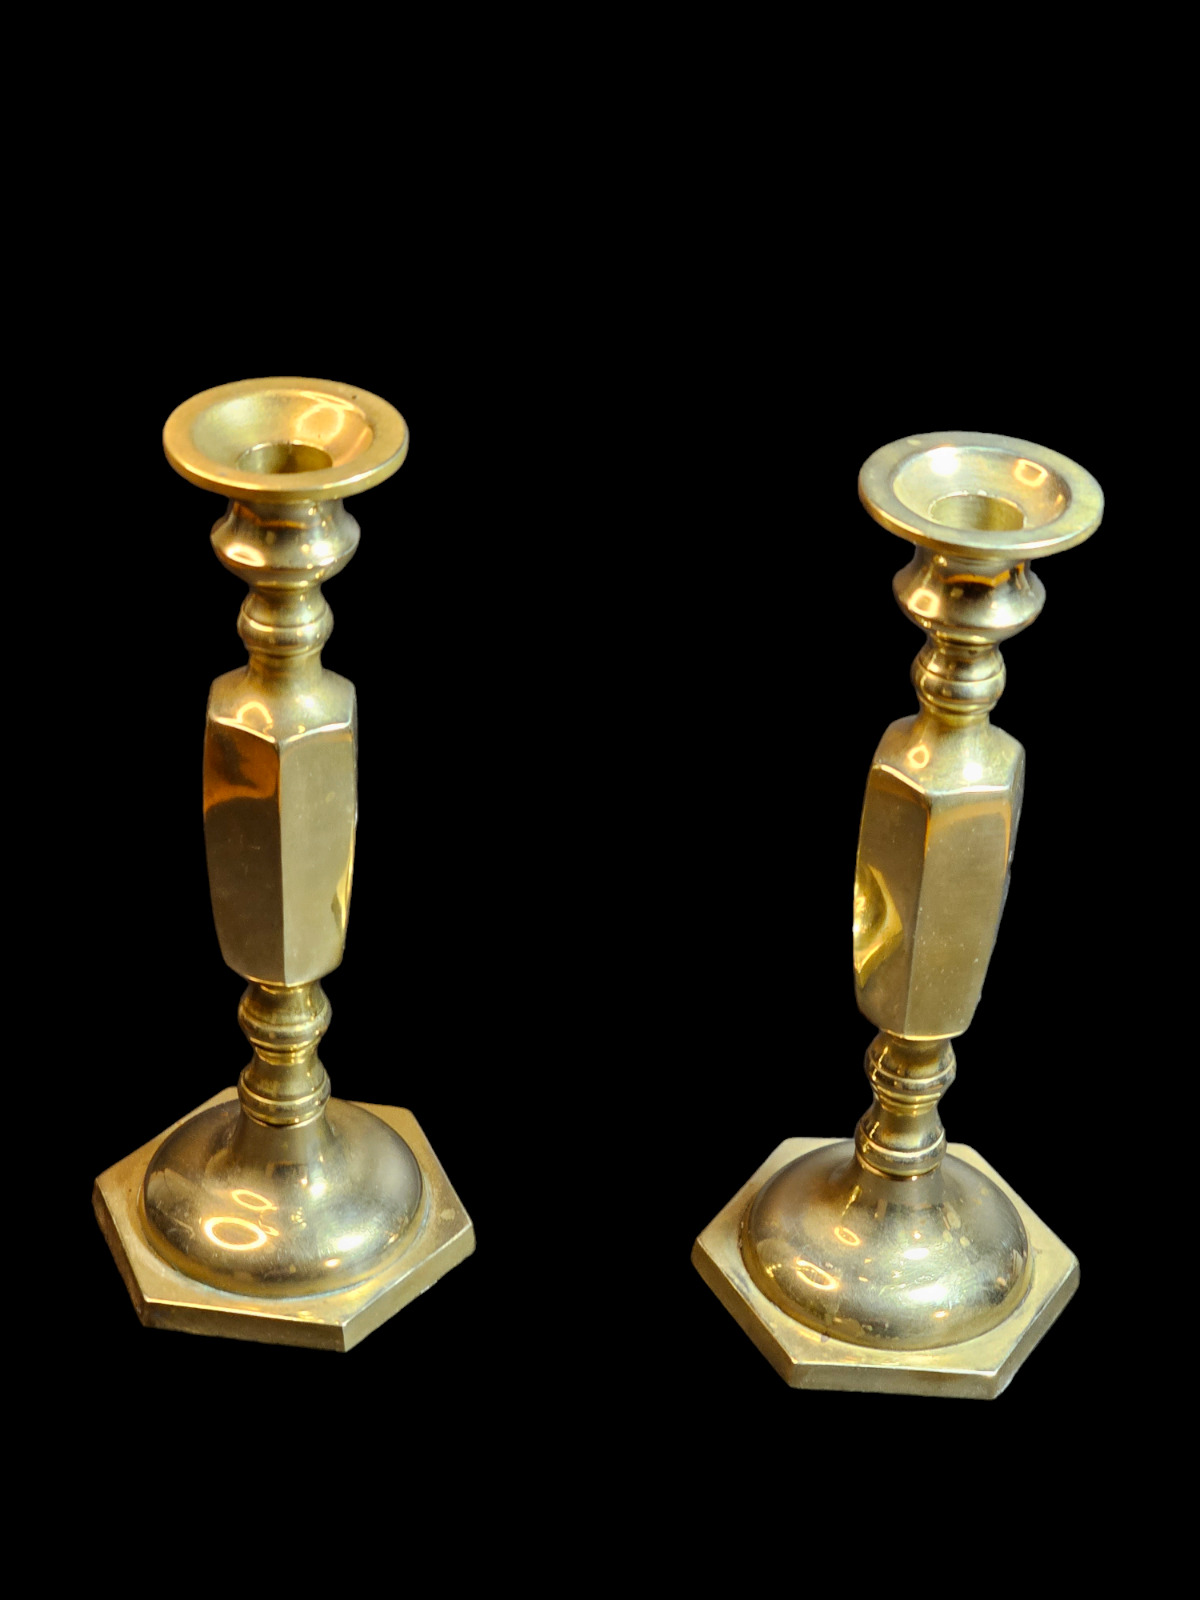 Title: 1960s/70s Brass Candlestick Pair: A Blend of Geometry and Craftsmanship